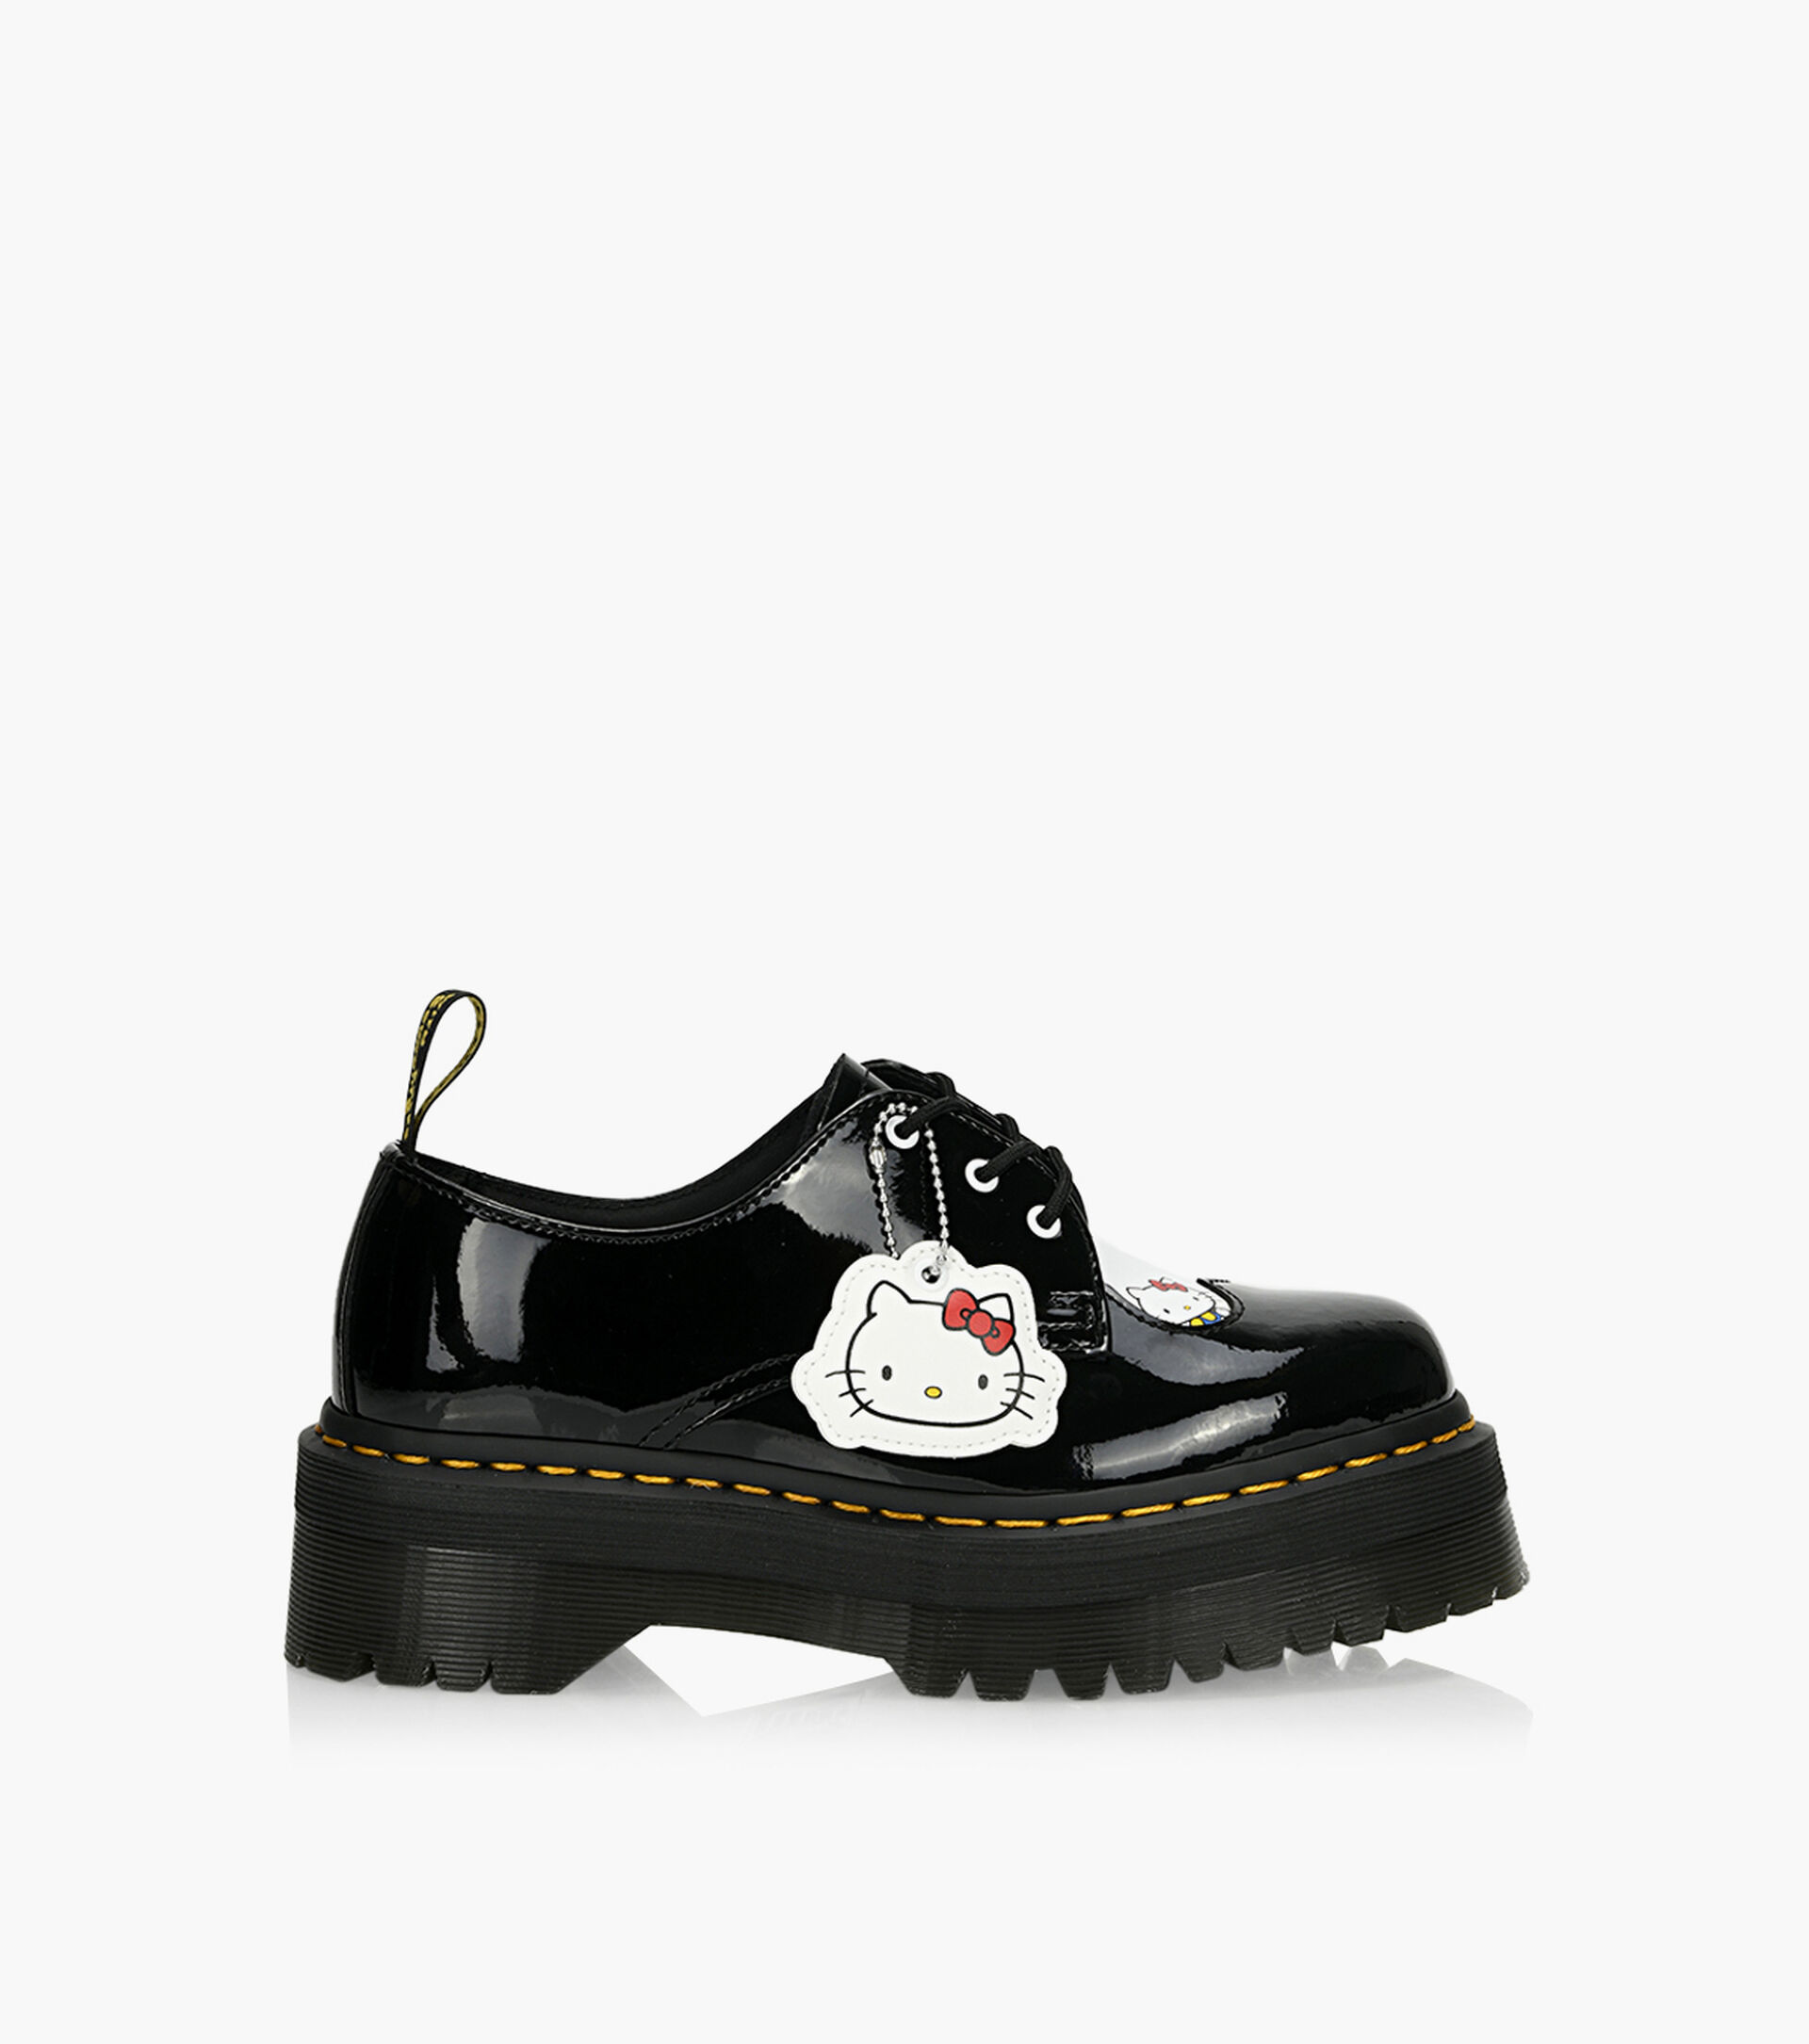 DR. MARTENS 1461 QUAD X HELLO KITTY - Black Patent Leather | Browns Shoes